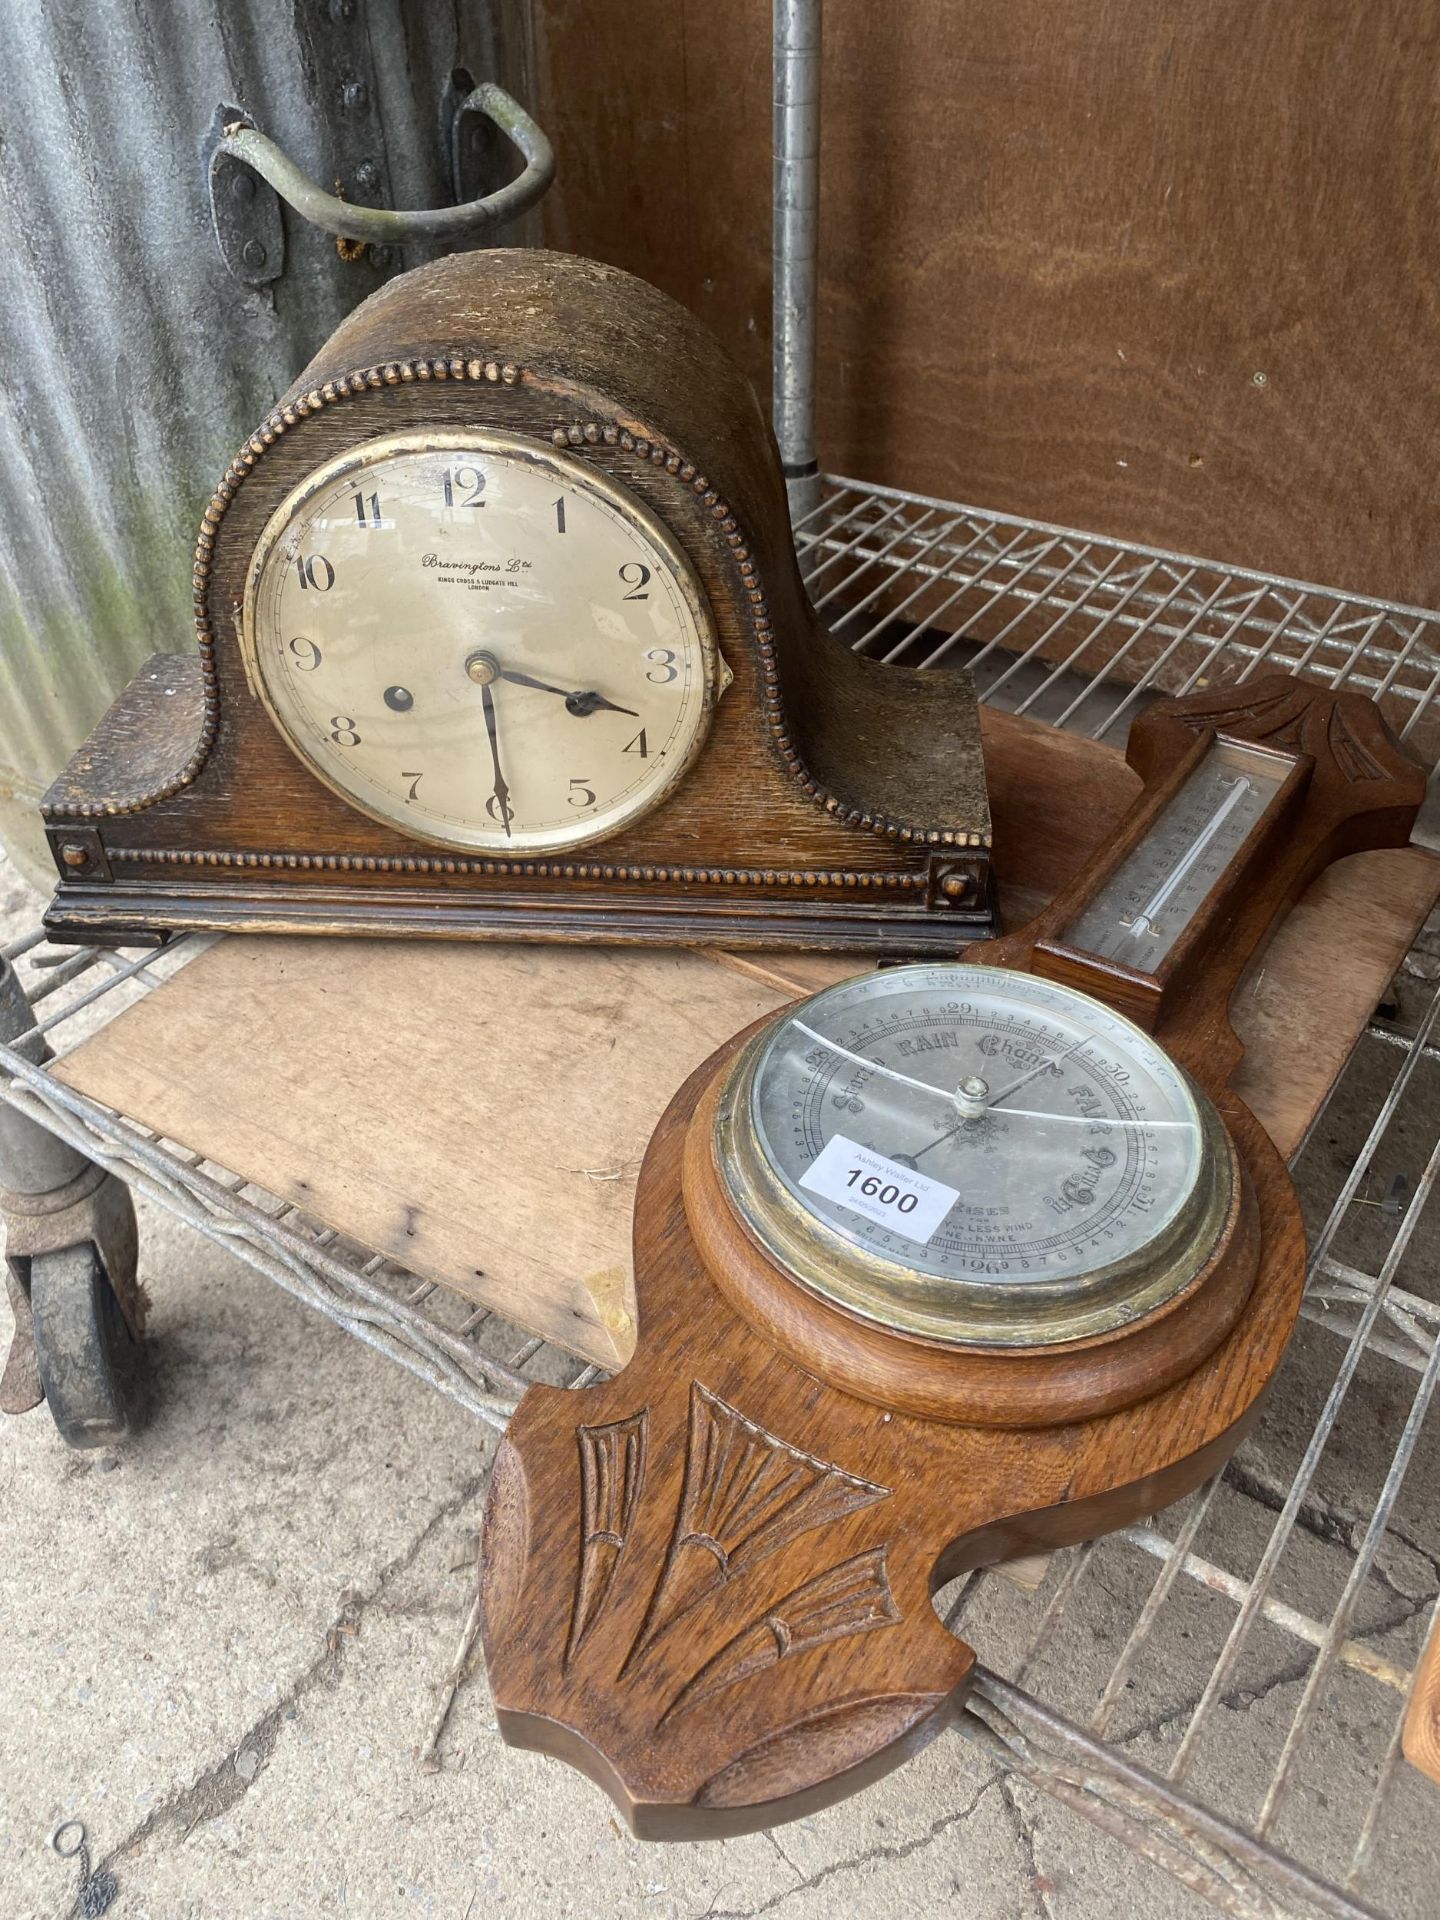 A VINTAGE WOODEN CASED BAROMETER AND A MANTLE CLOCK